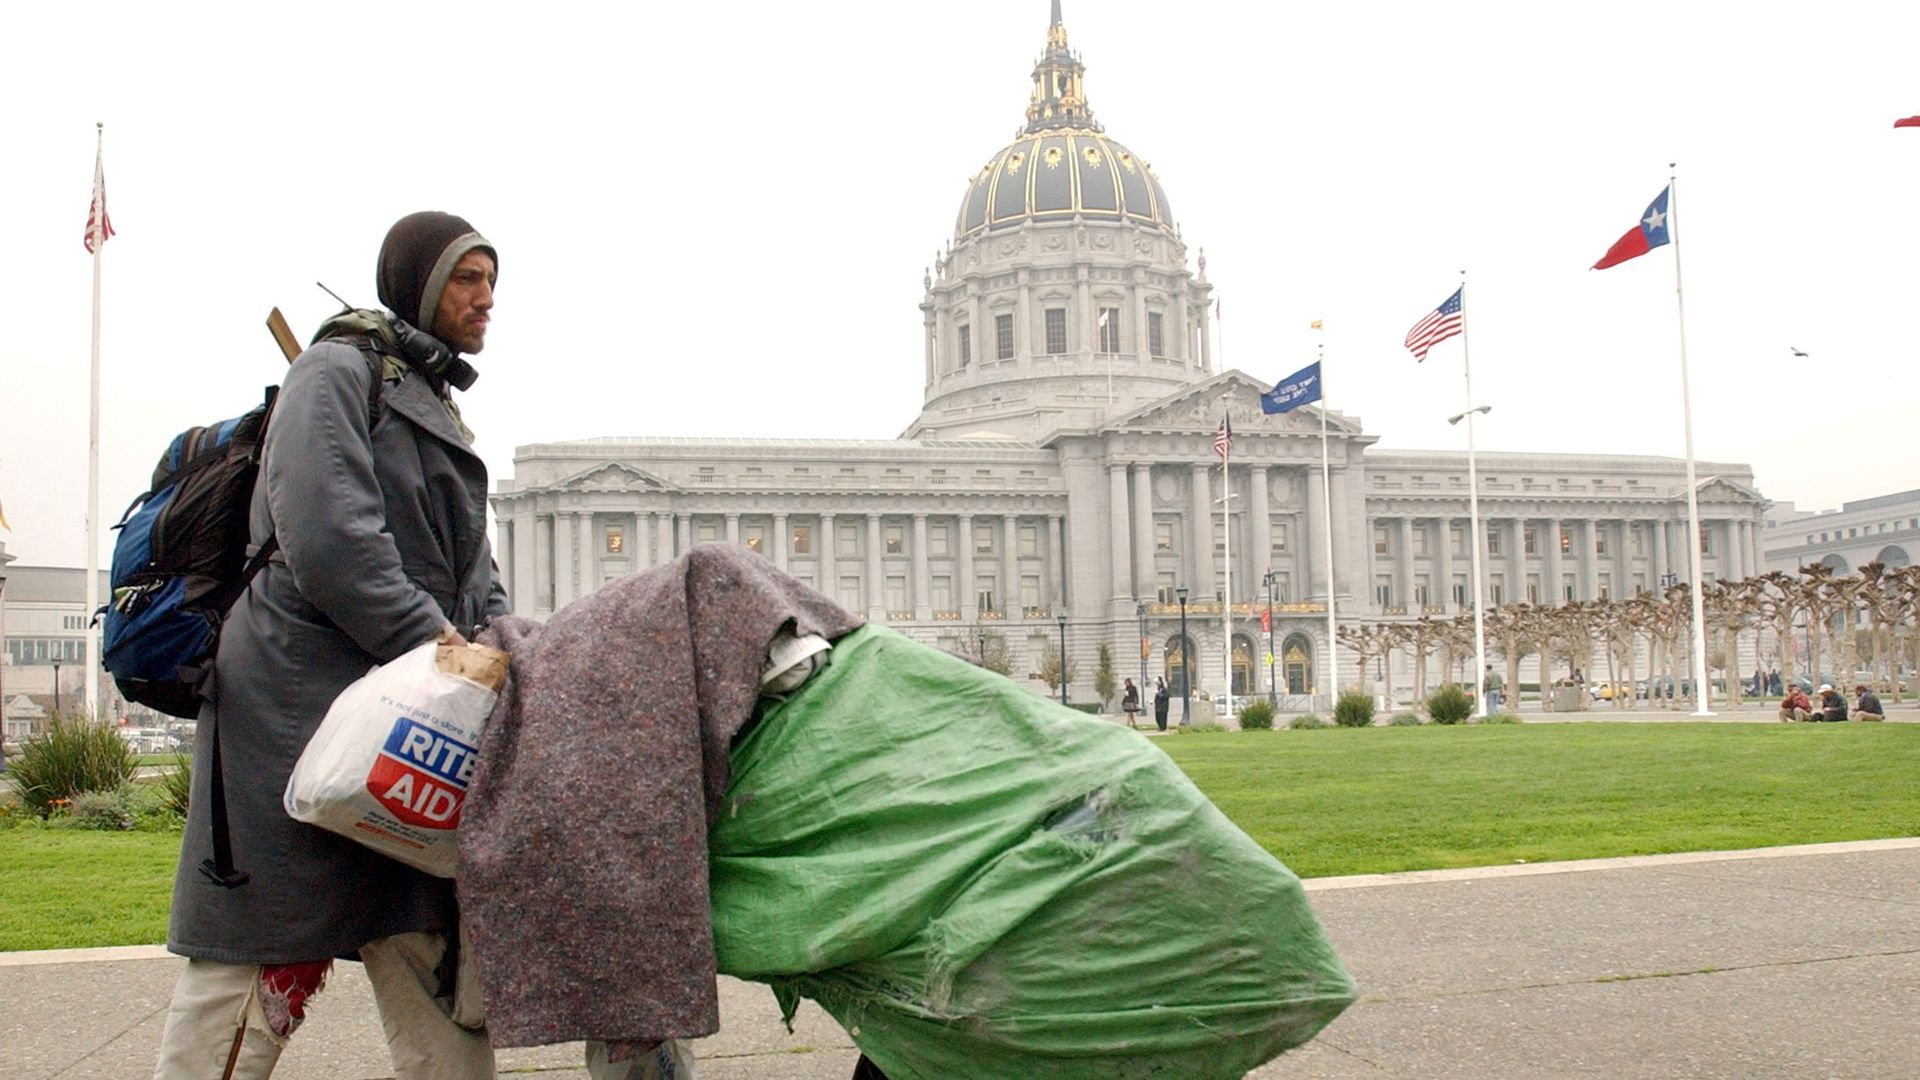 Homeless man pushes green rolly bag in front of San Francisco City Hall dome.